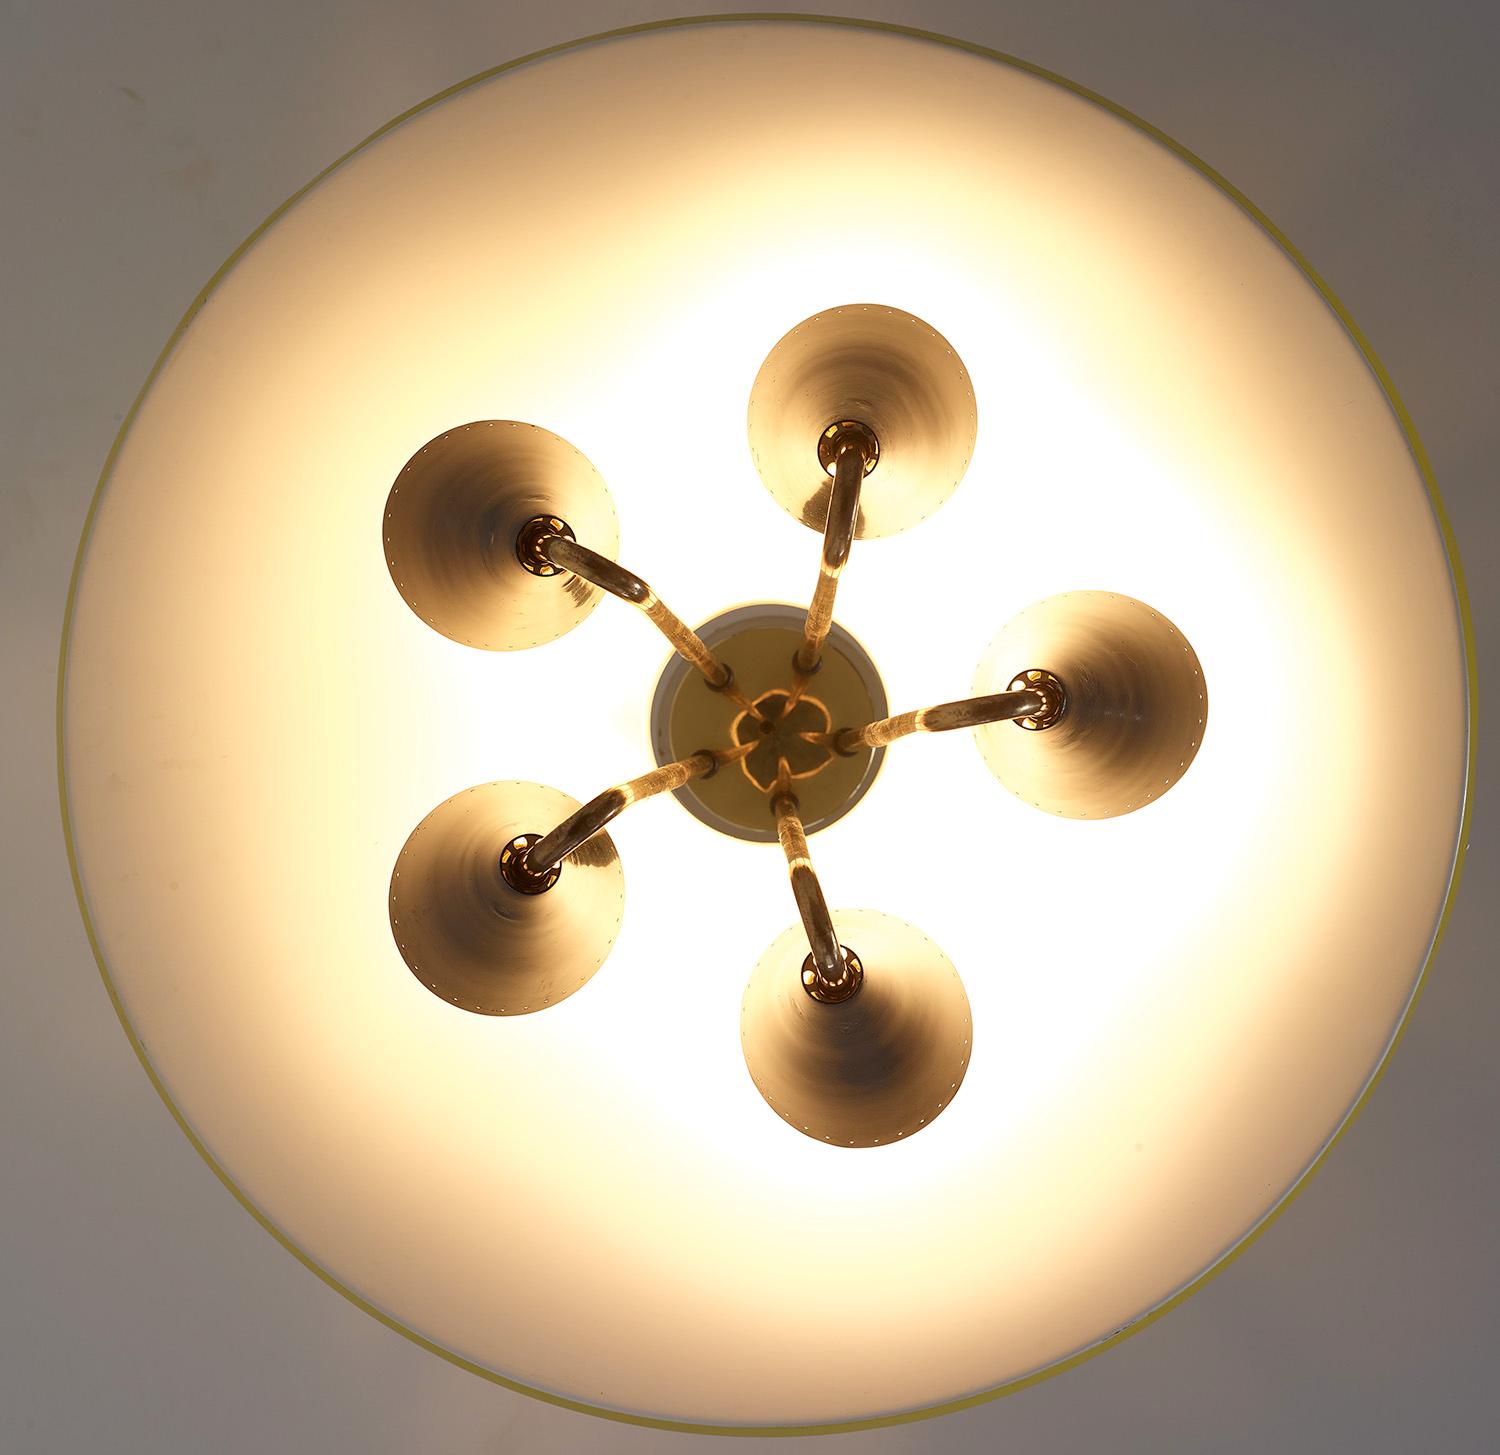 Mid-20th Century Ceiling Light in Lacquered Metal and Brass, BAG Turgi, Switzerland, 1950